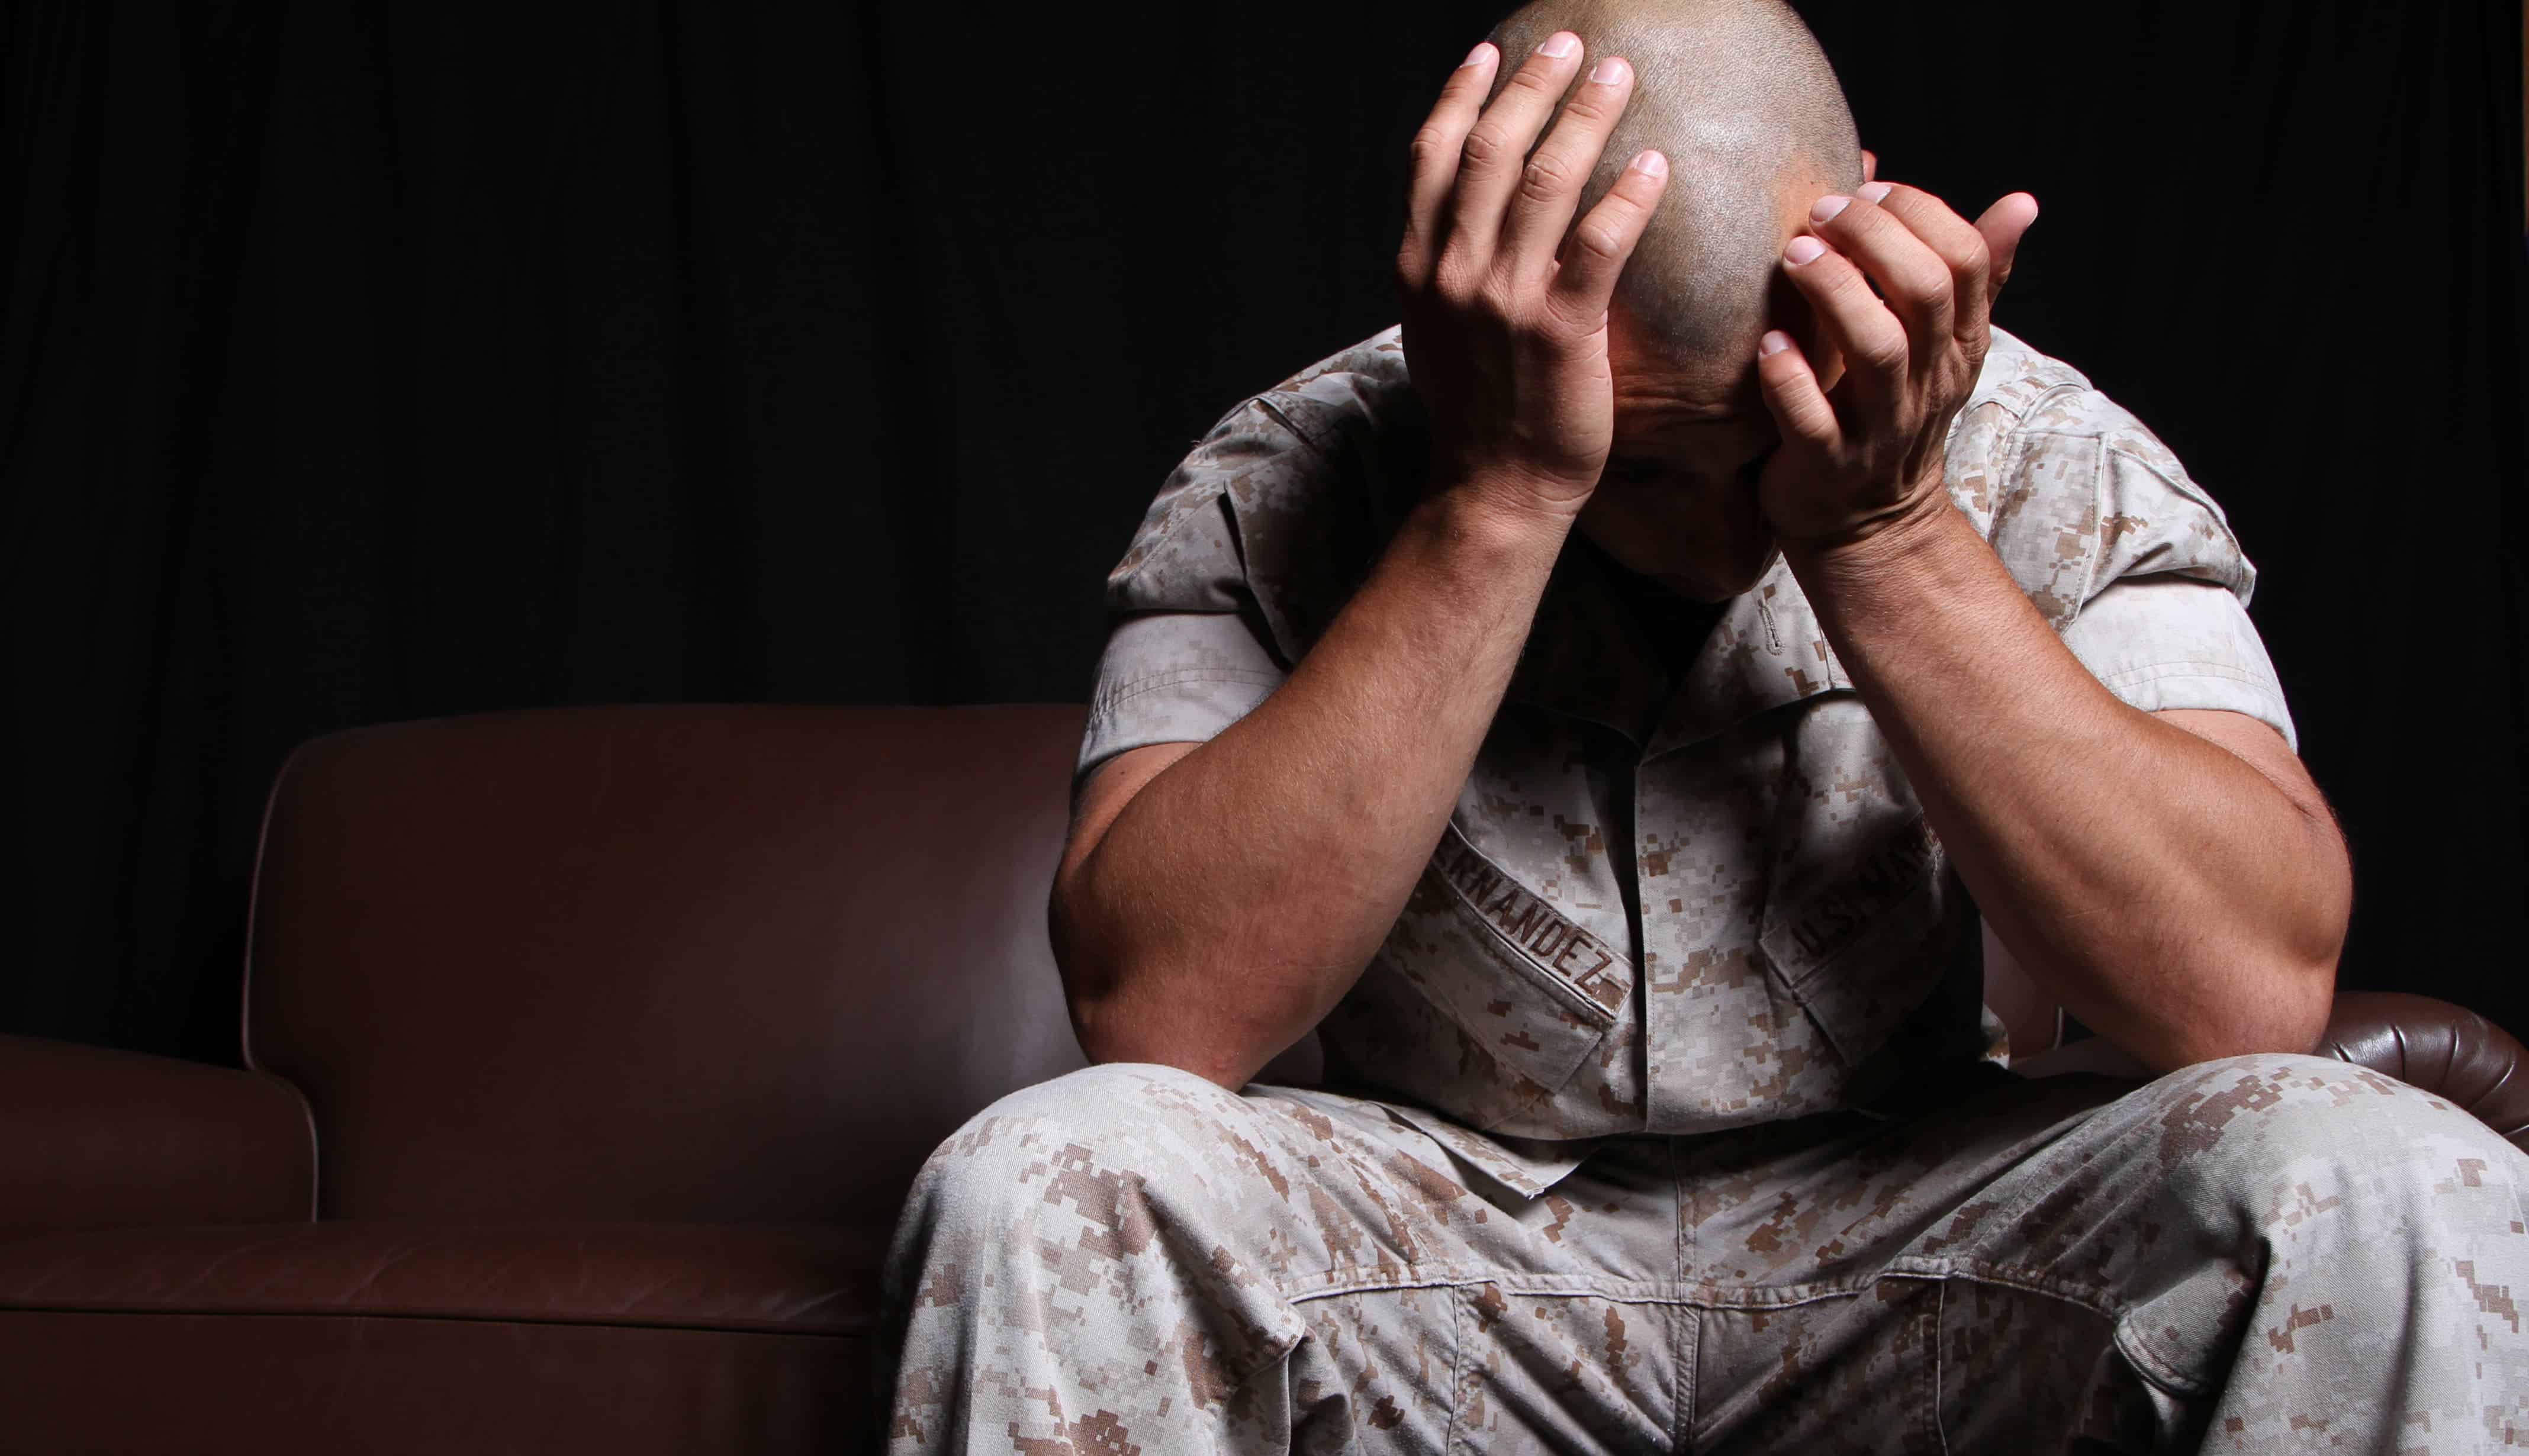 Many Marines return to the states with vivid memories of their combat experiences, and the array of emotions they face internally may be hard to deal with.  Image credits: Marines from Arlington.